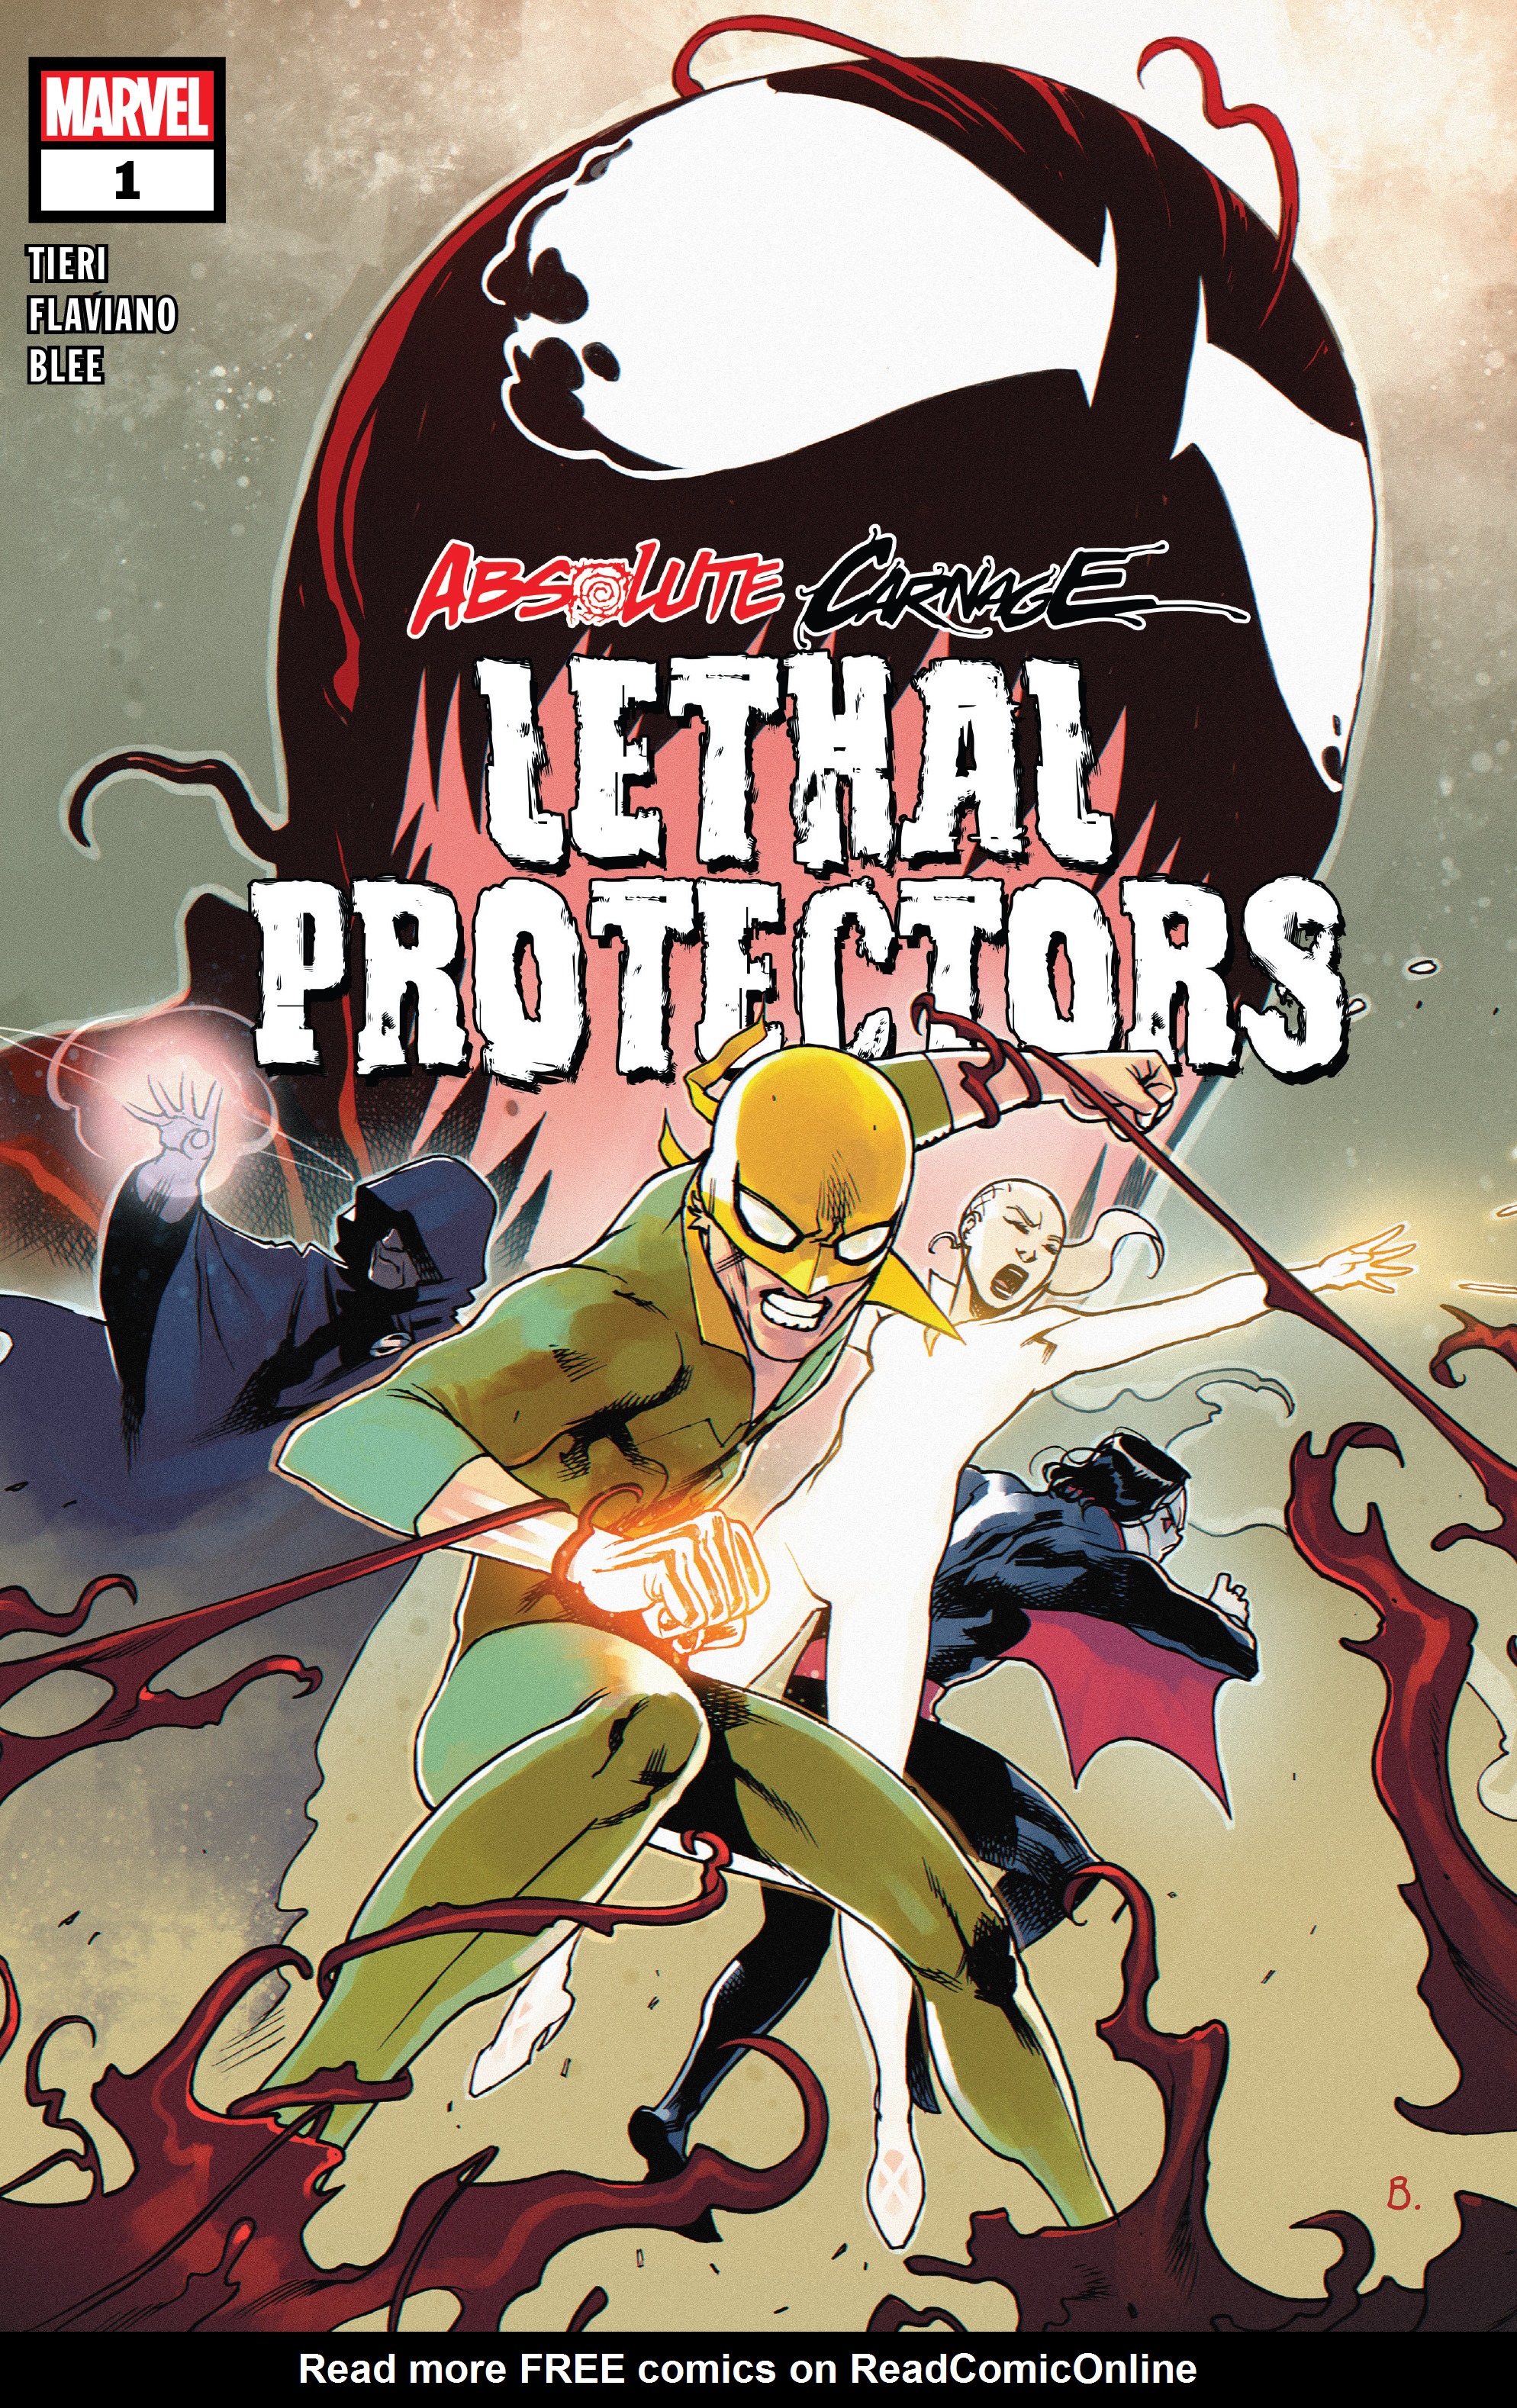 Read online Absolute Carnage: Lethal Protectors comic -  Issue #1 - 1